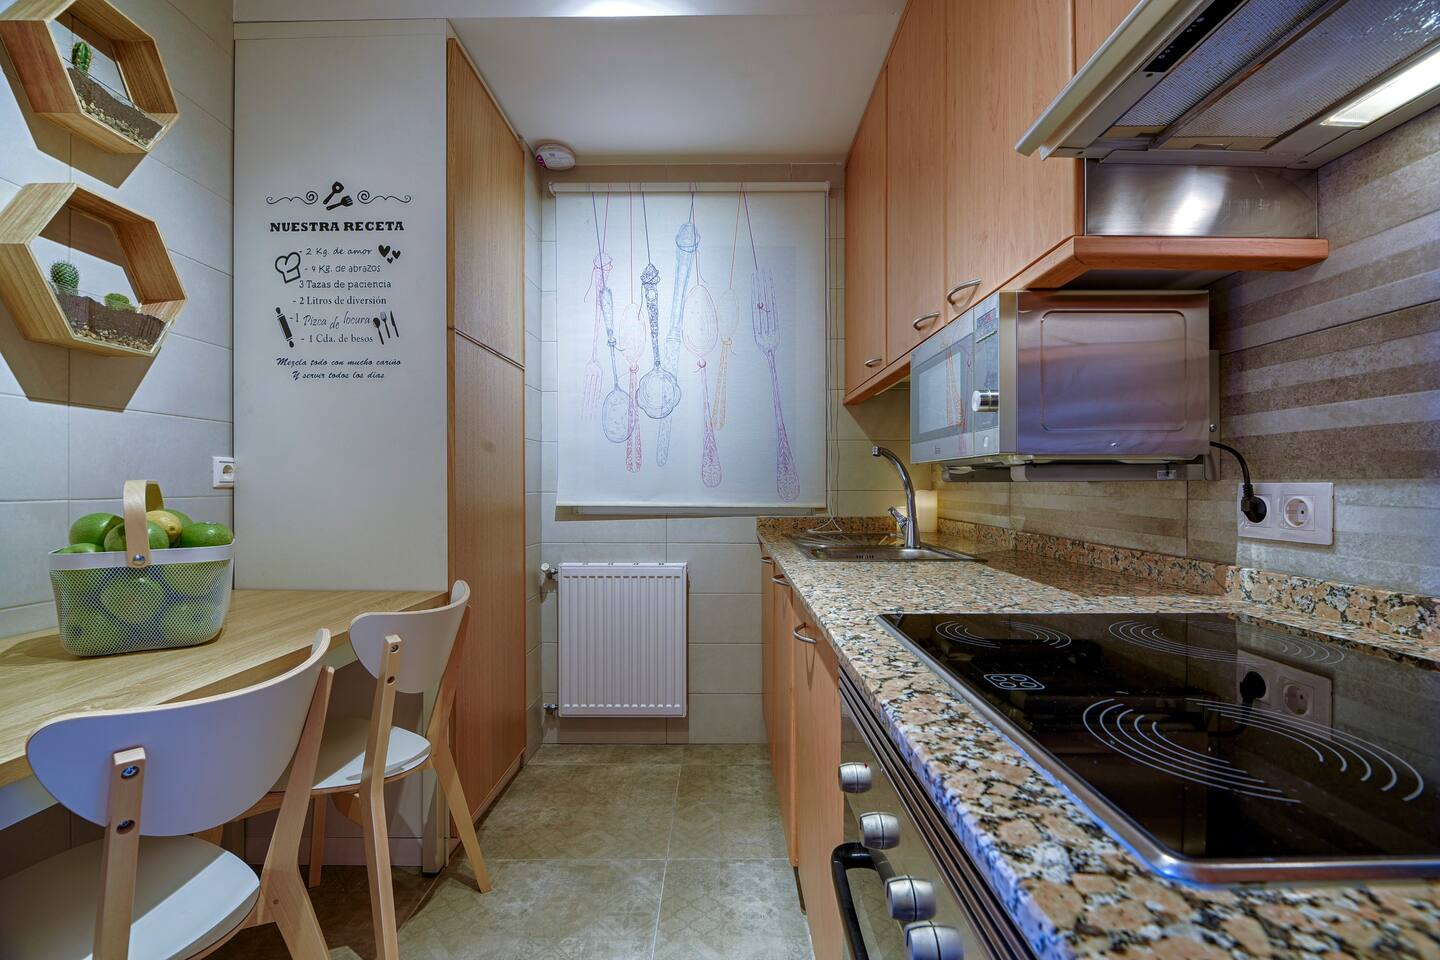 kitchen - 1 Bedroom apartment for rent in A Coruña 2